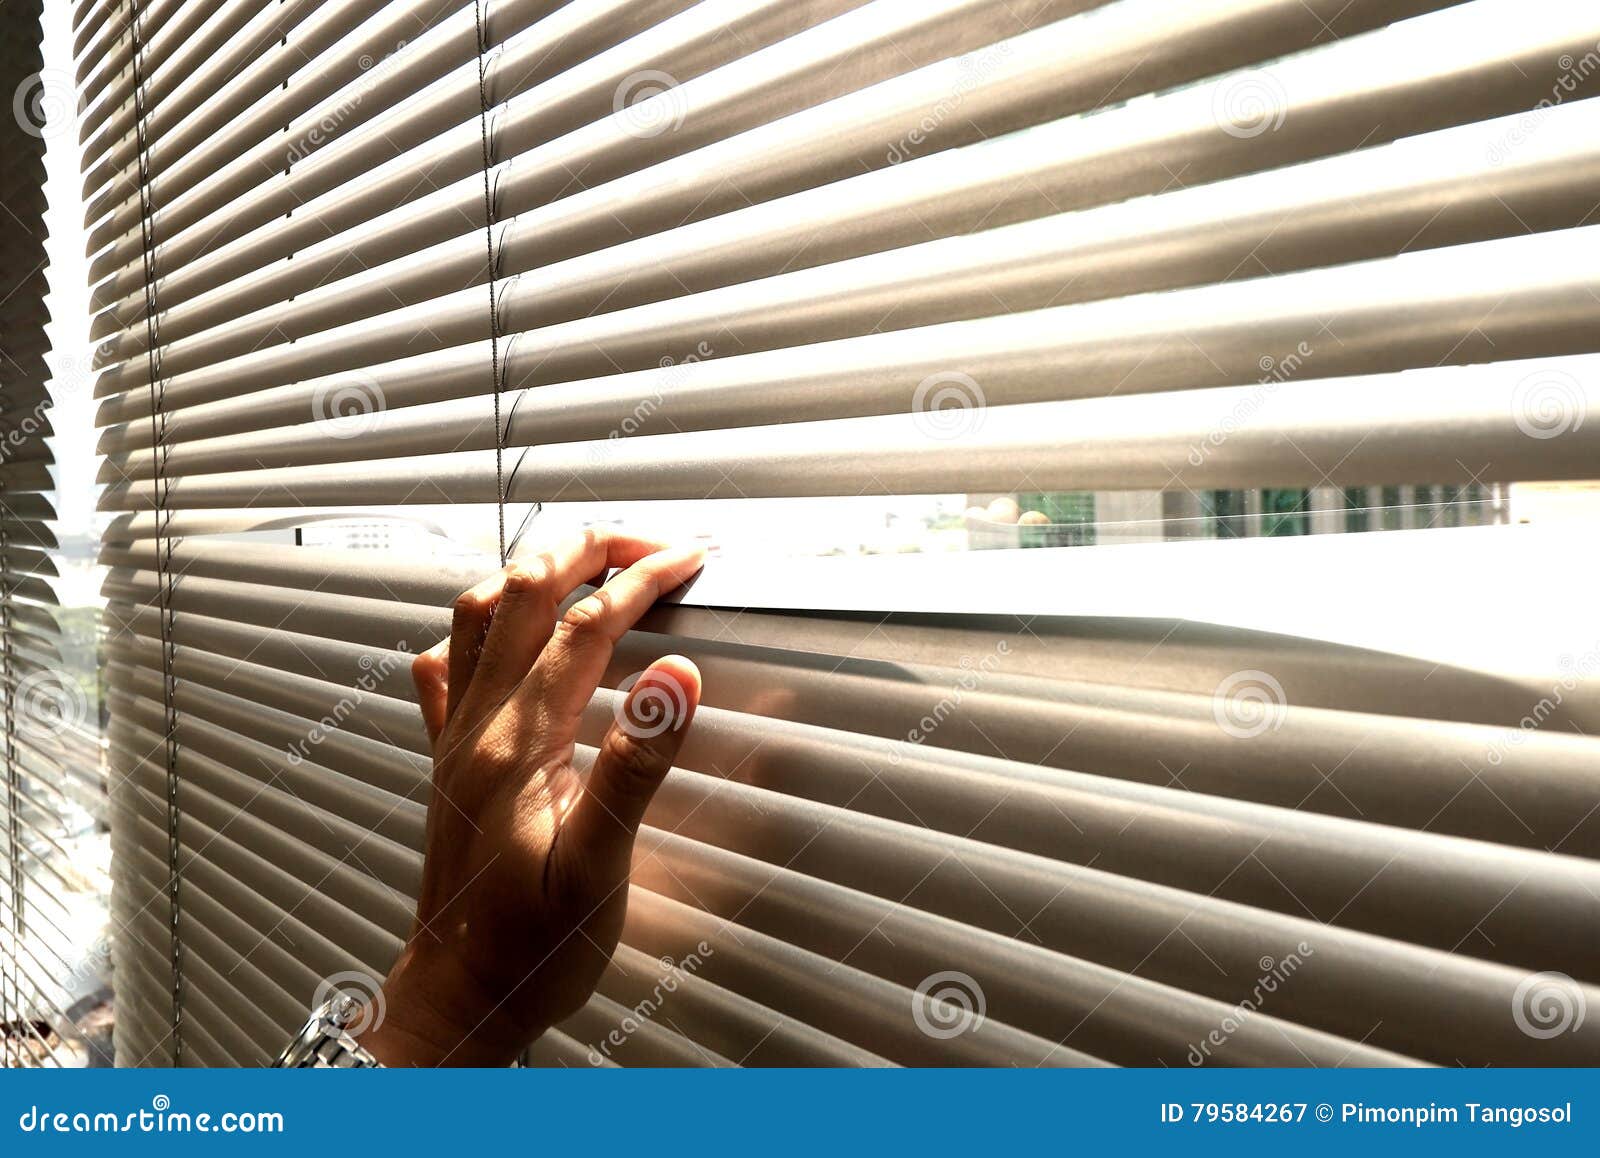 Hand Taking a Peek through the Window Blinds Stock Image - Image of ...